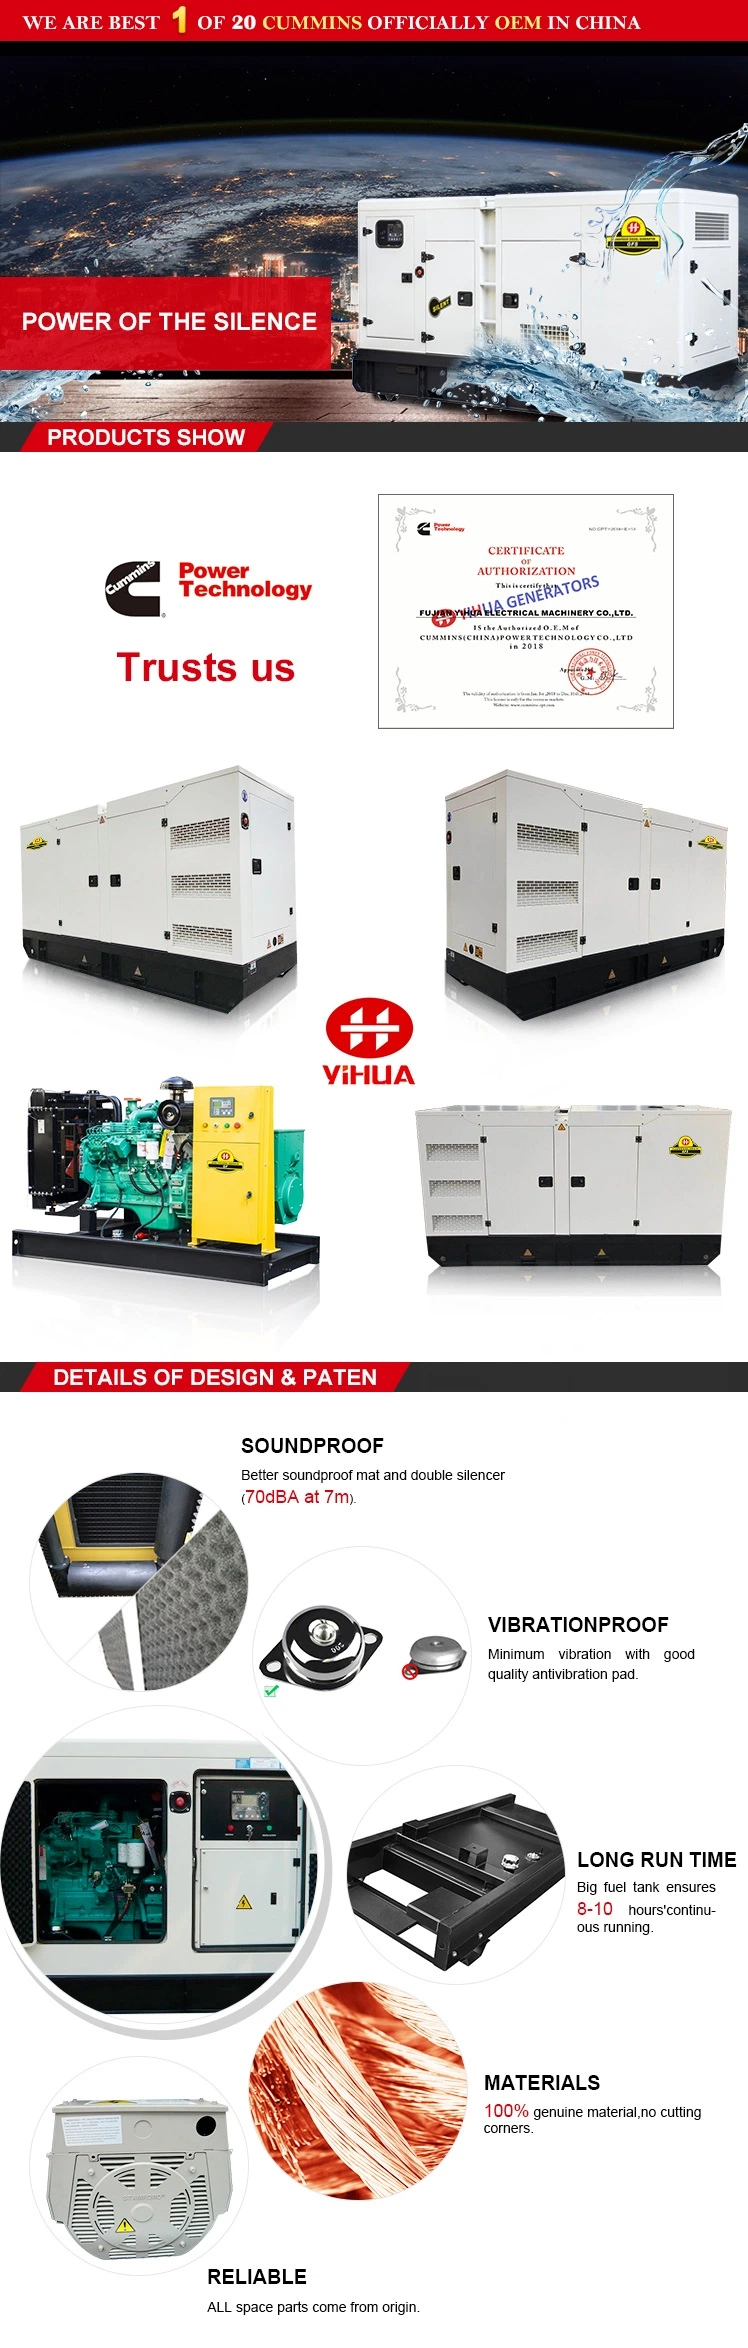 27.5 kVA Soundproof Diesel Power Electrical Generator Ce Approval[IC180302A]